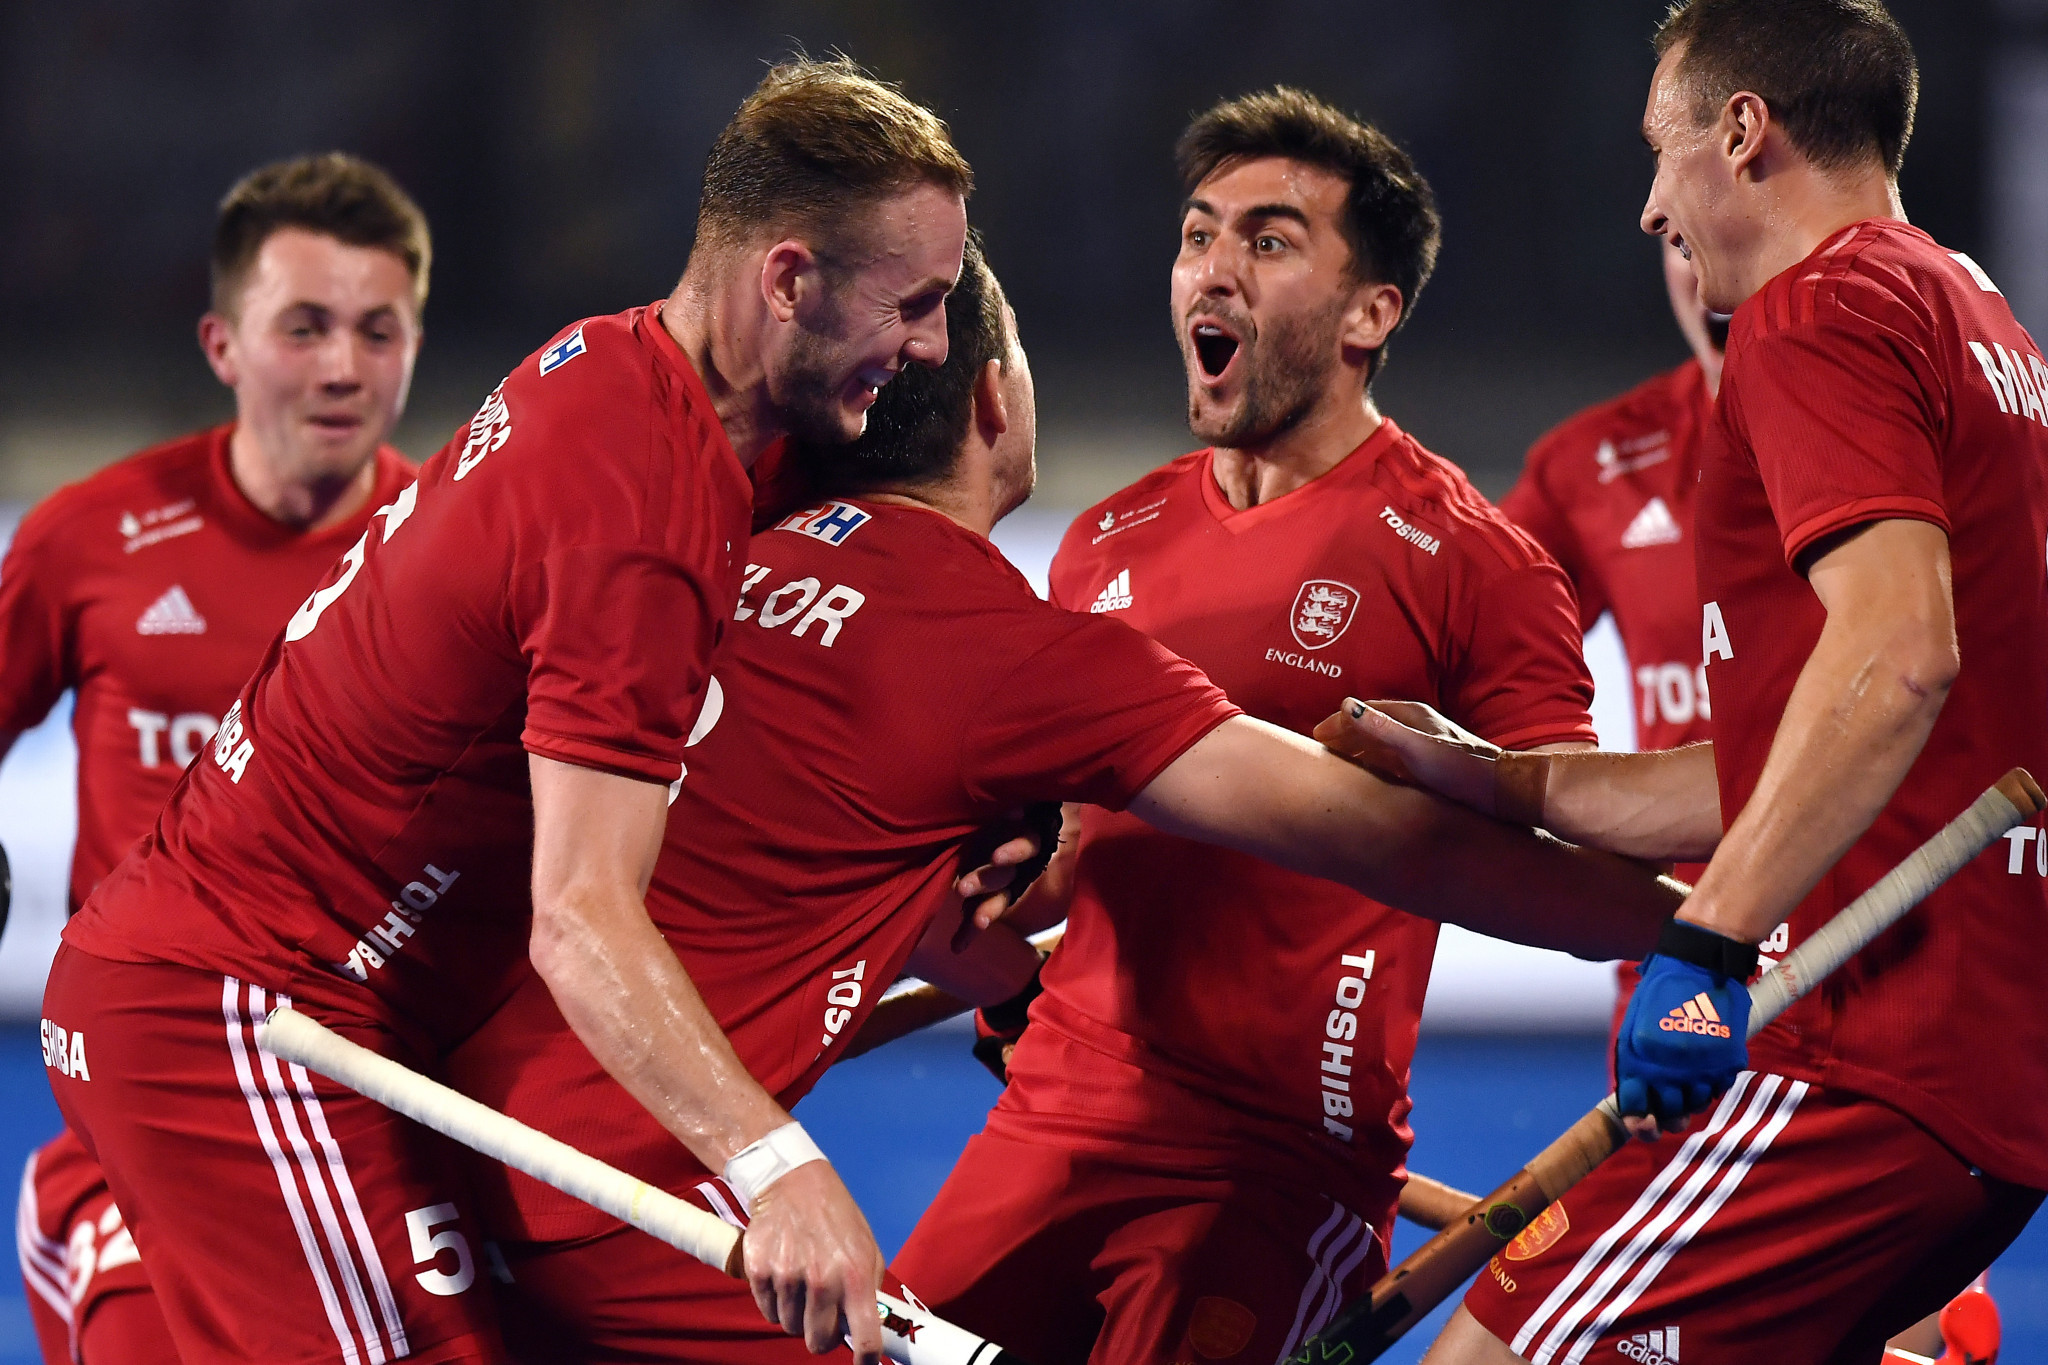 England and France advance to quarter-finals at FIH Men's Hockey World Cup